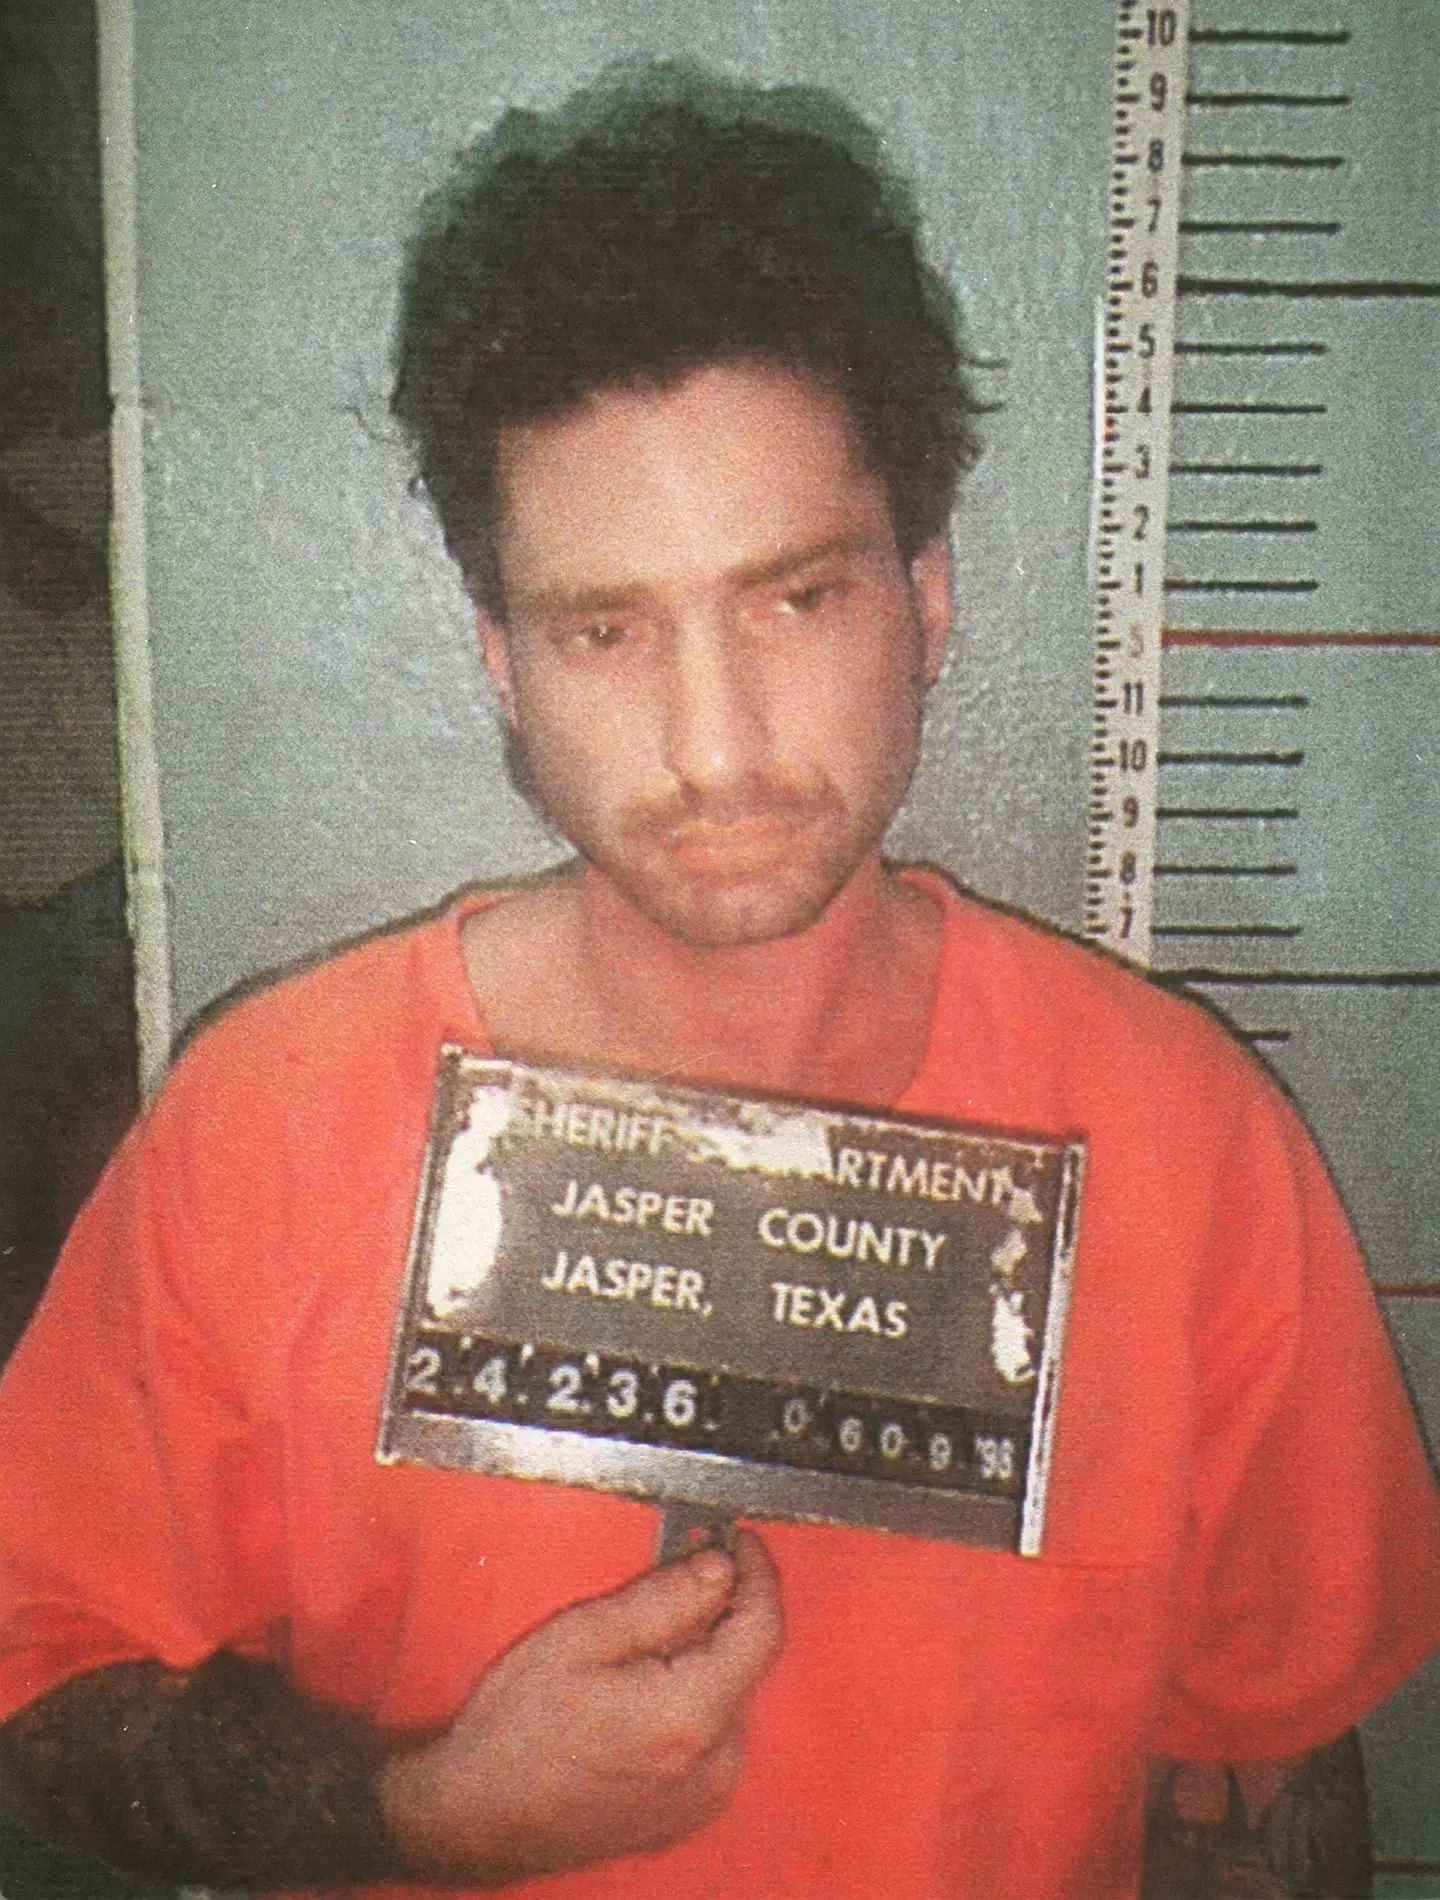 Lawrence Russell Brewer was executed for the murder of James Byrd Jr.